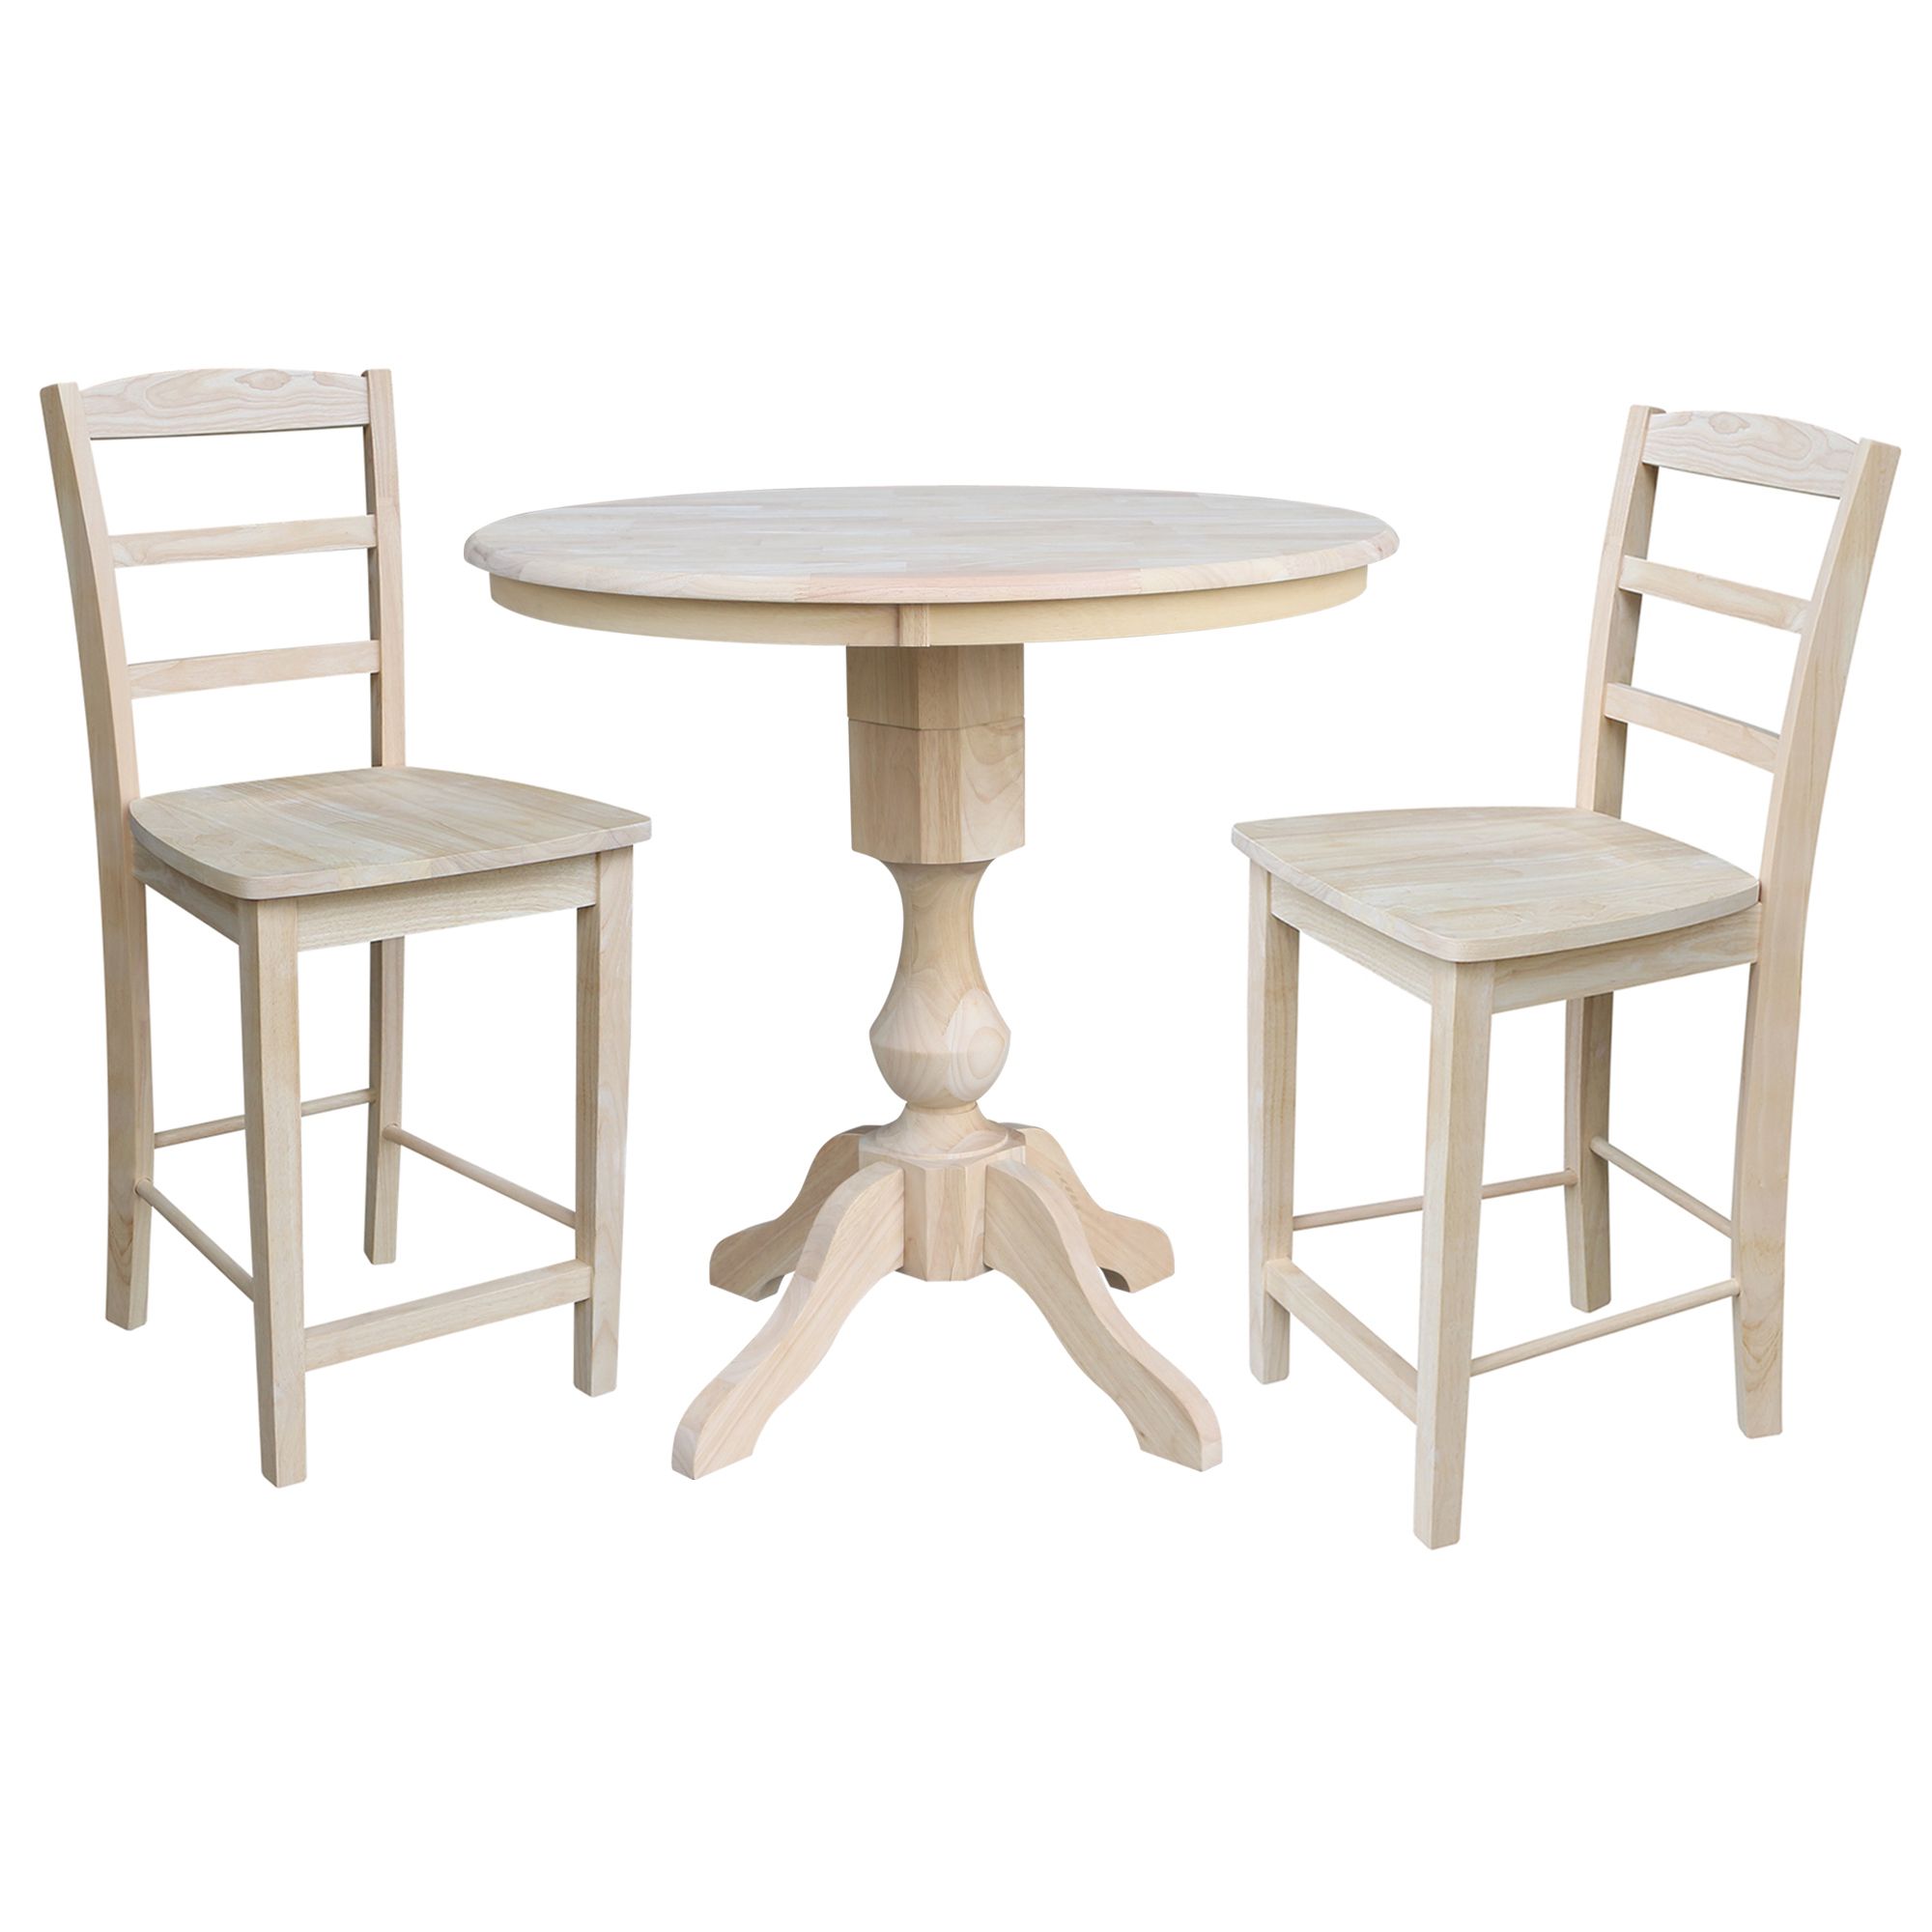 36" Round Top Pedestal Counter Height Table With 2 Madrid For 2020 Bar Height Pedestal Dining Tables (View 4 of 20)